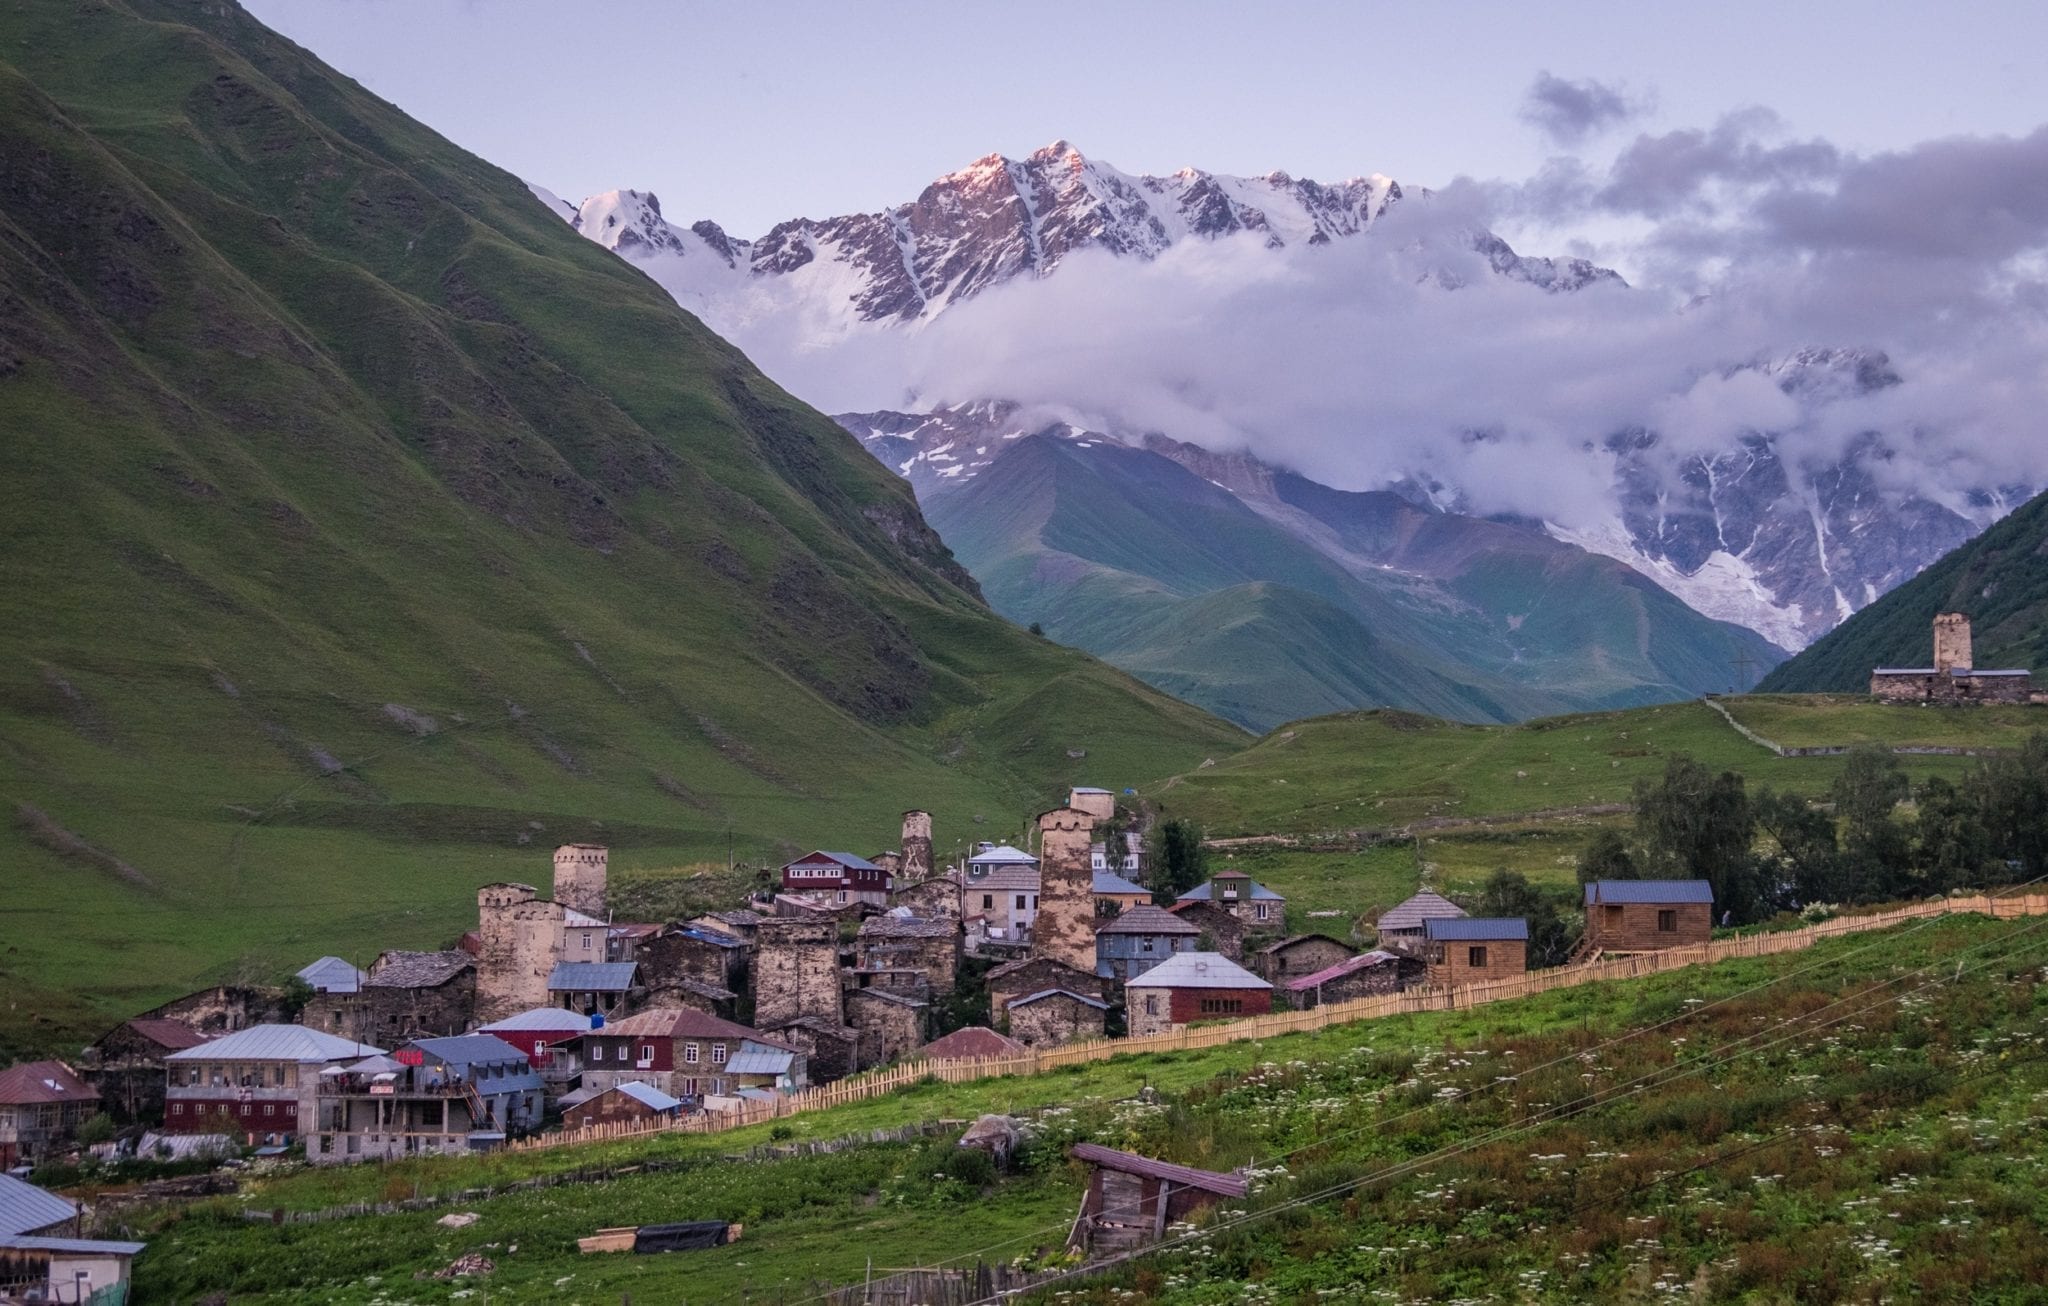 At dusk, the village of Ushguli looking purple in the evening light, surrounded by hills, purple mountains covered by clouds in the background.